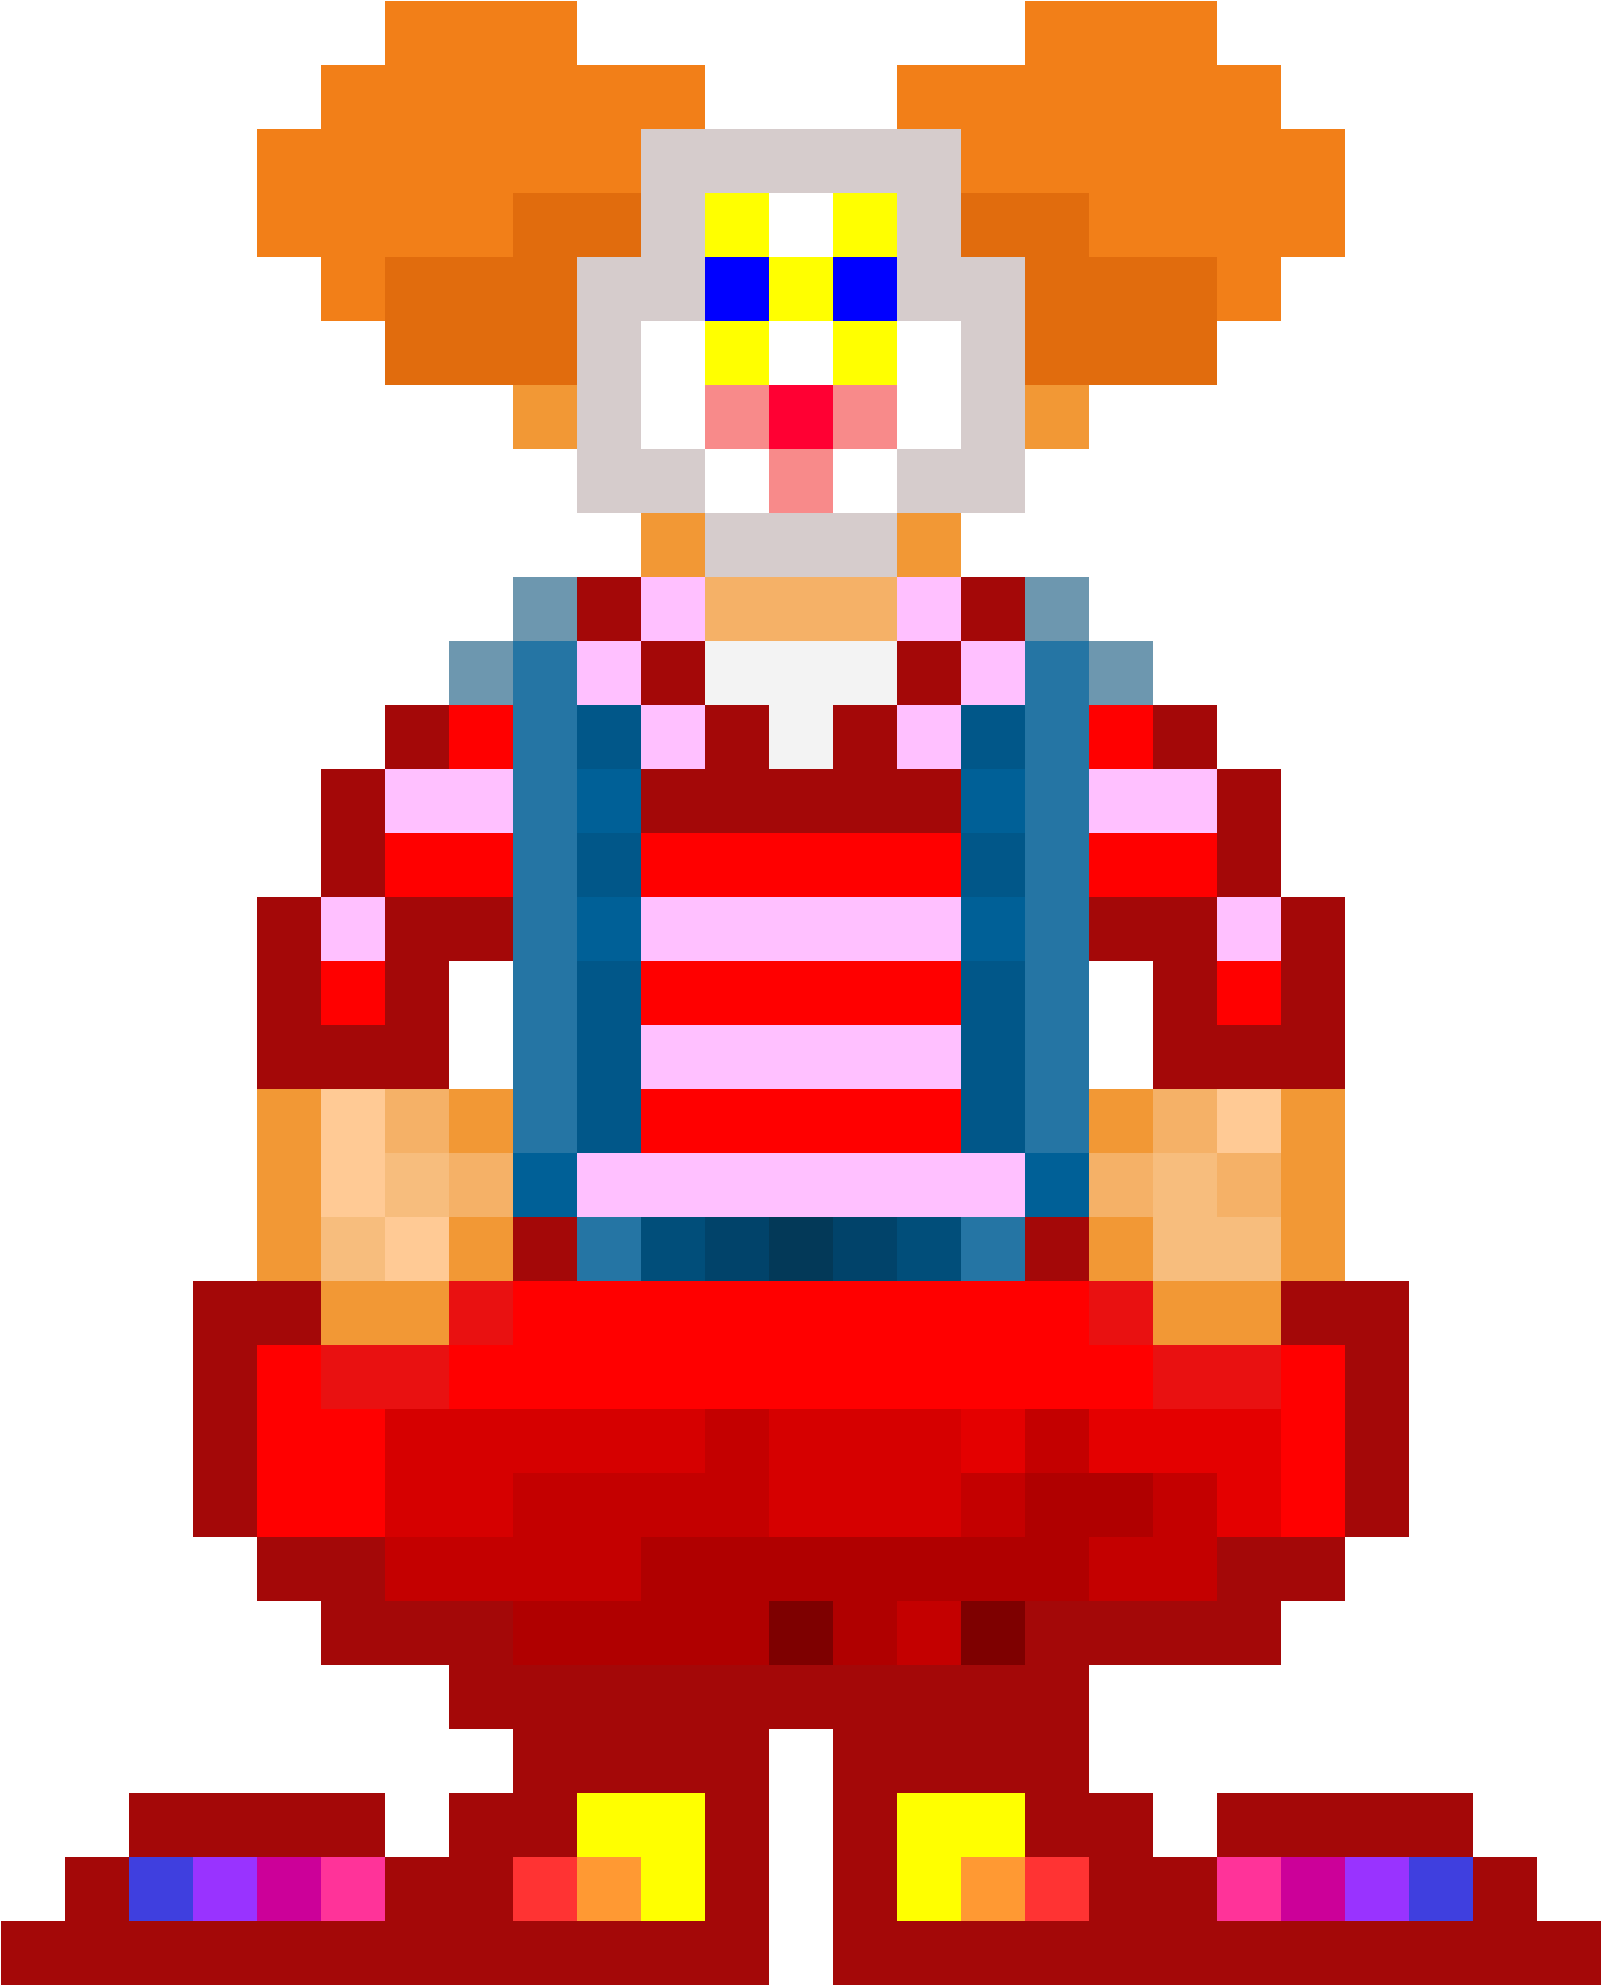 30528027 - Space Station 13 Clown Clipart - Large Size Png Image - PikPng.